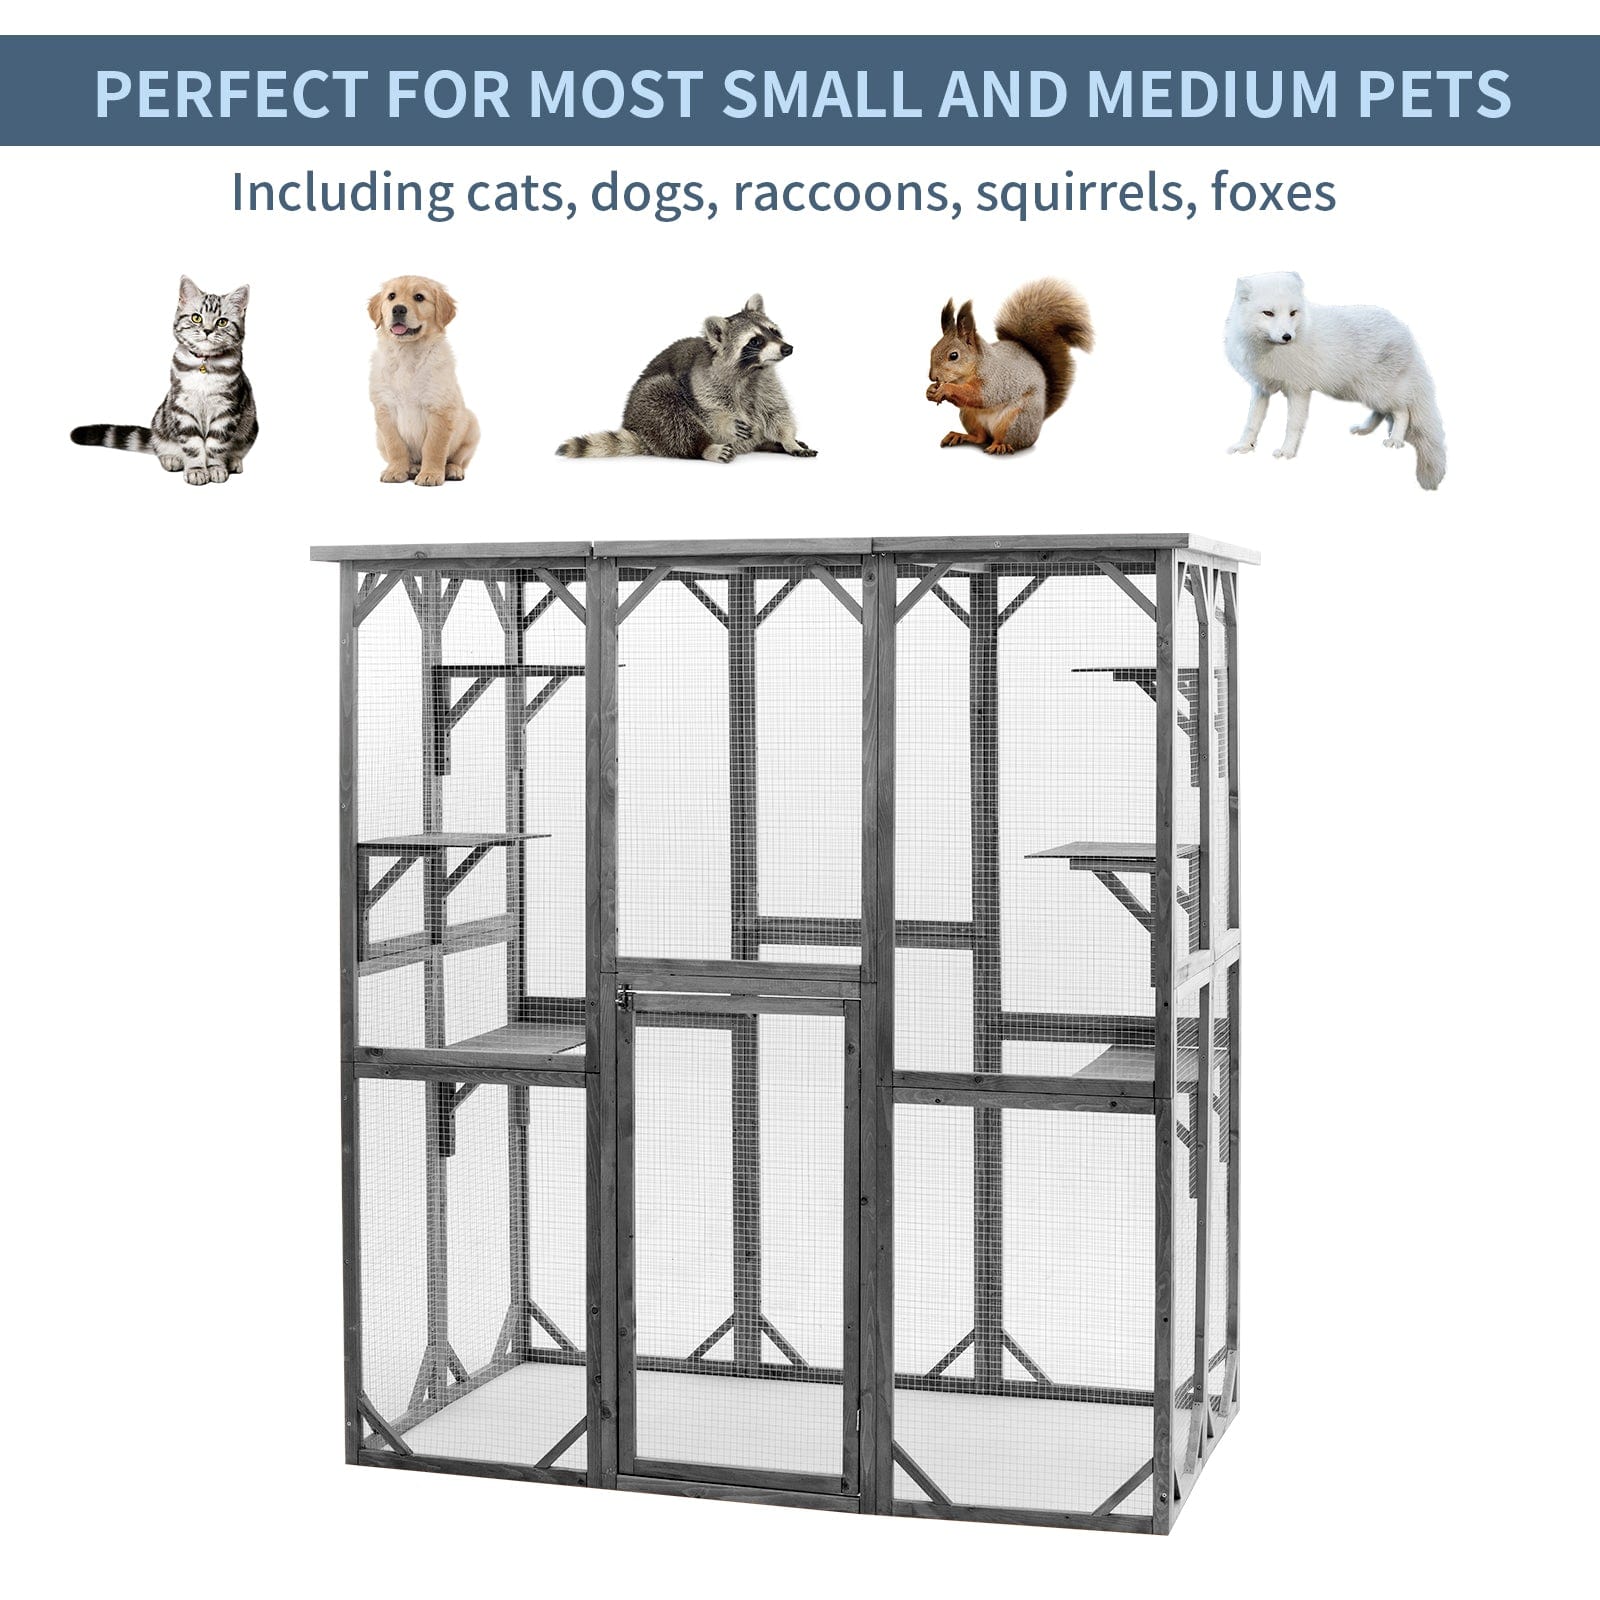 Elecwish Cat House Catio Enclosure with Wire Mesh PE1001GY is perfect for most small and medium pets